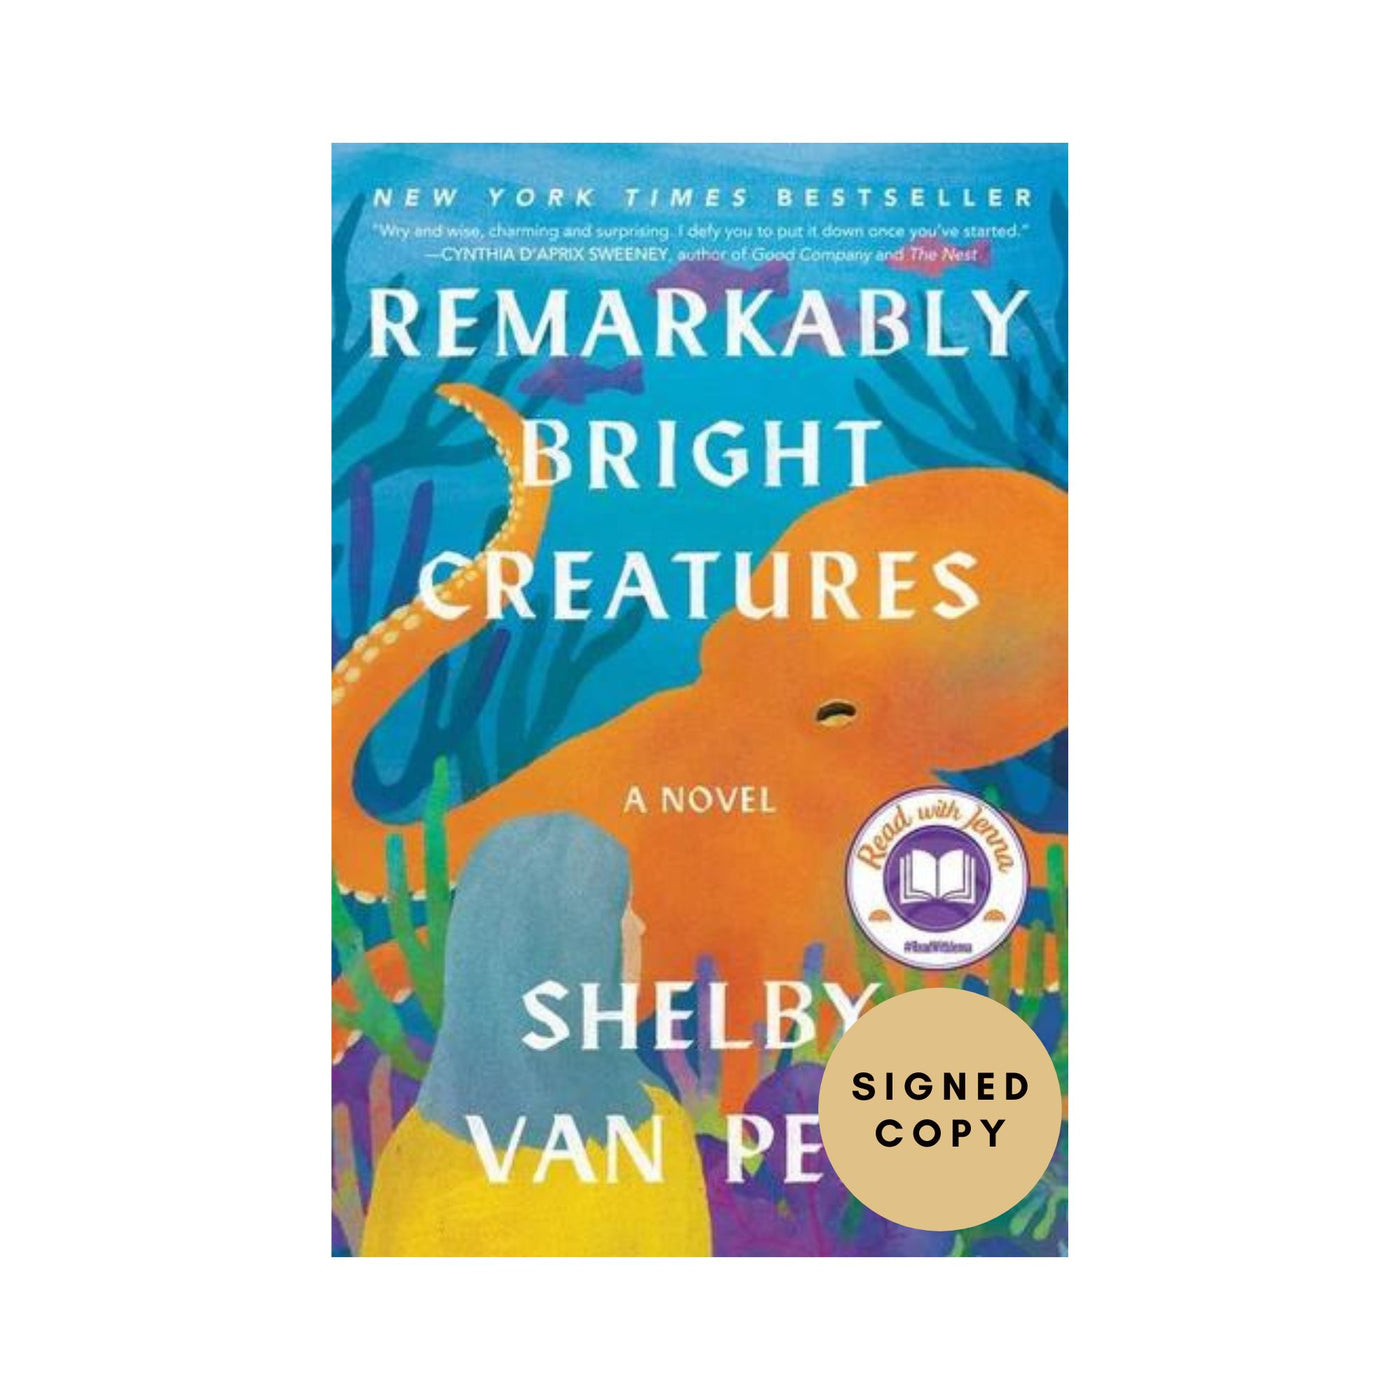 Remarkably Bright Creatures by Shelby Van Pelt (Signed Copy)